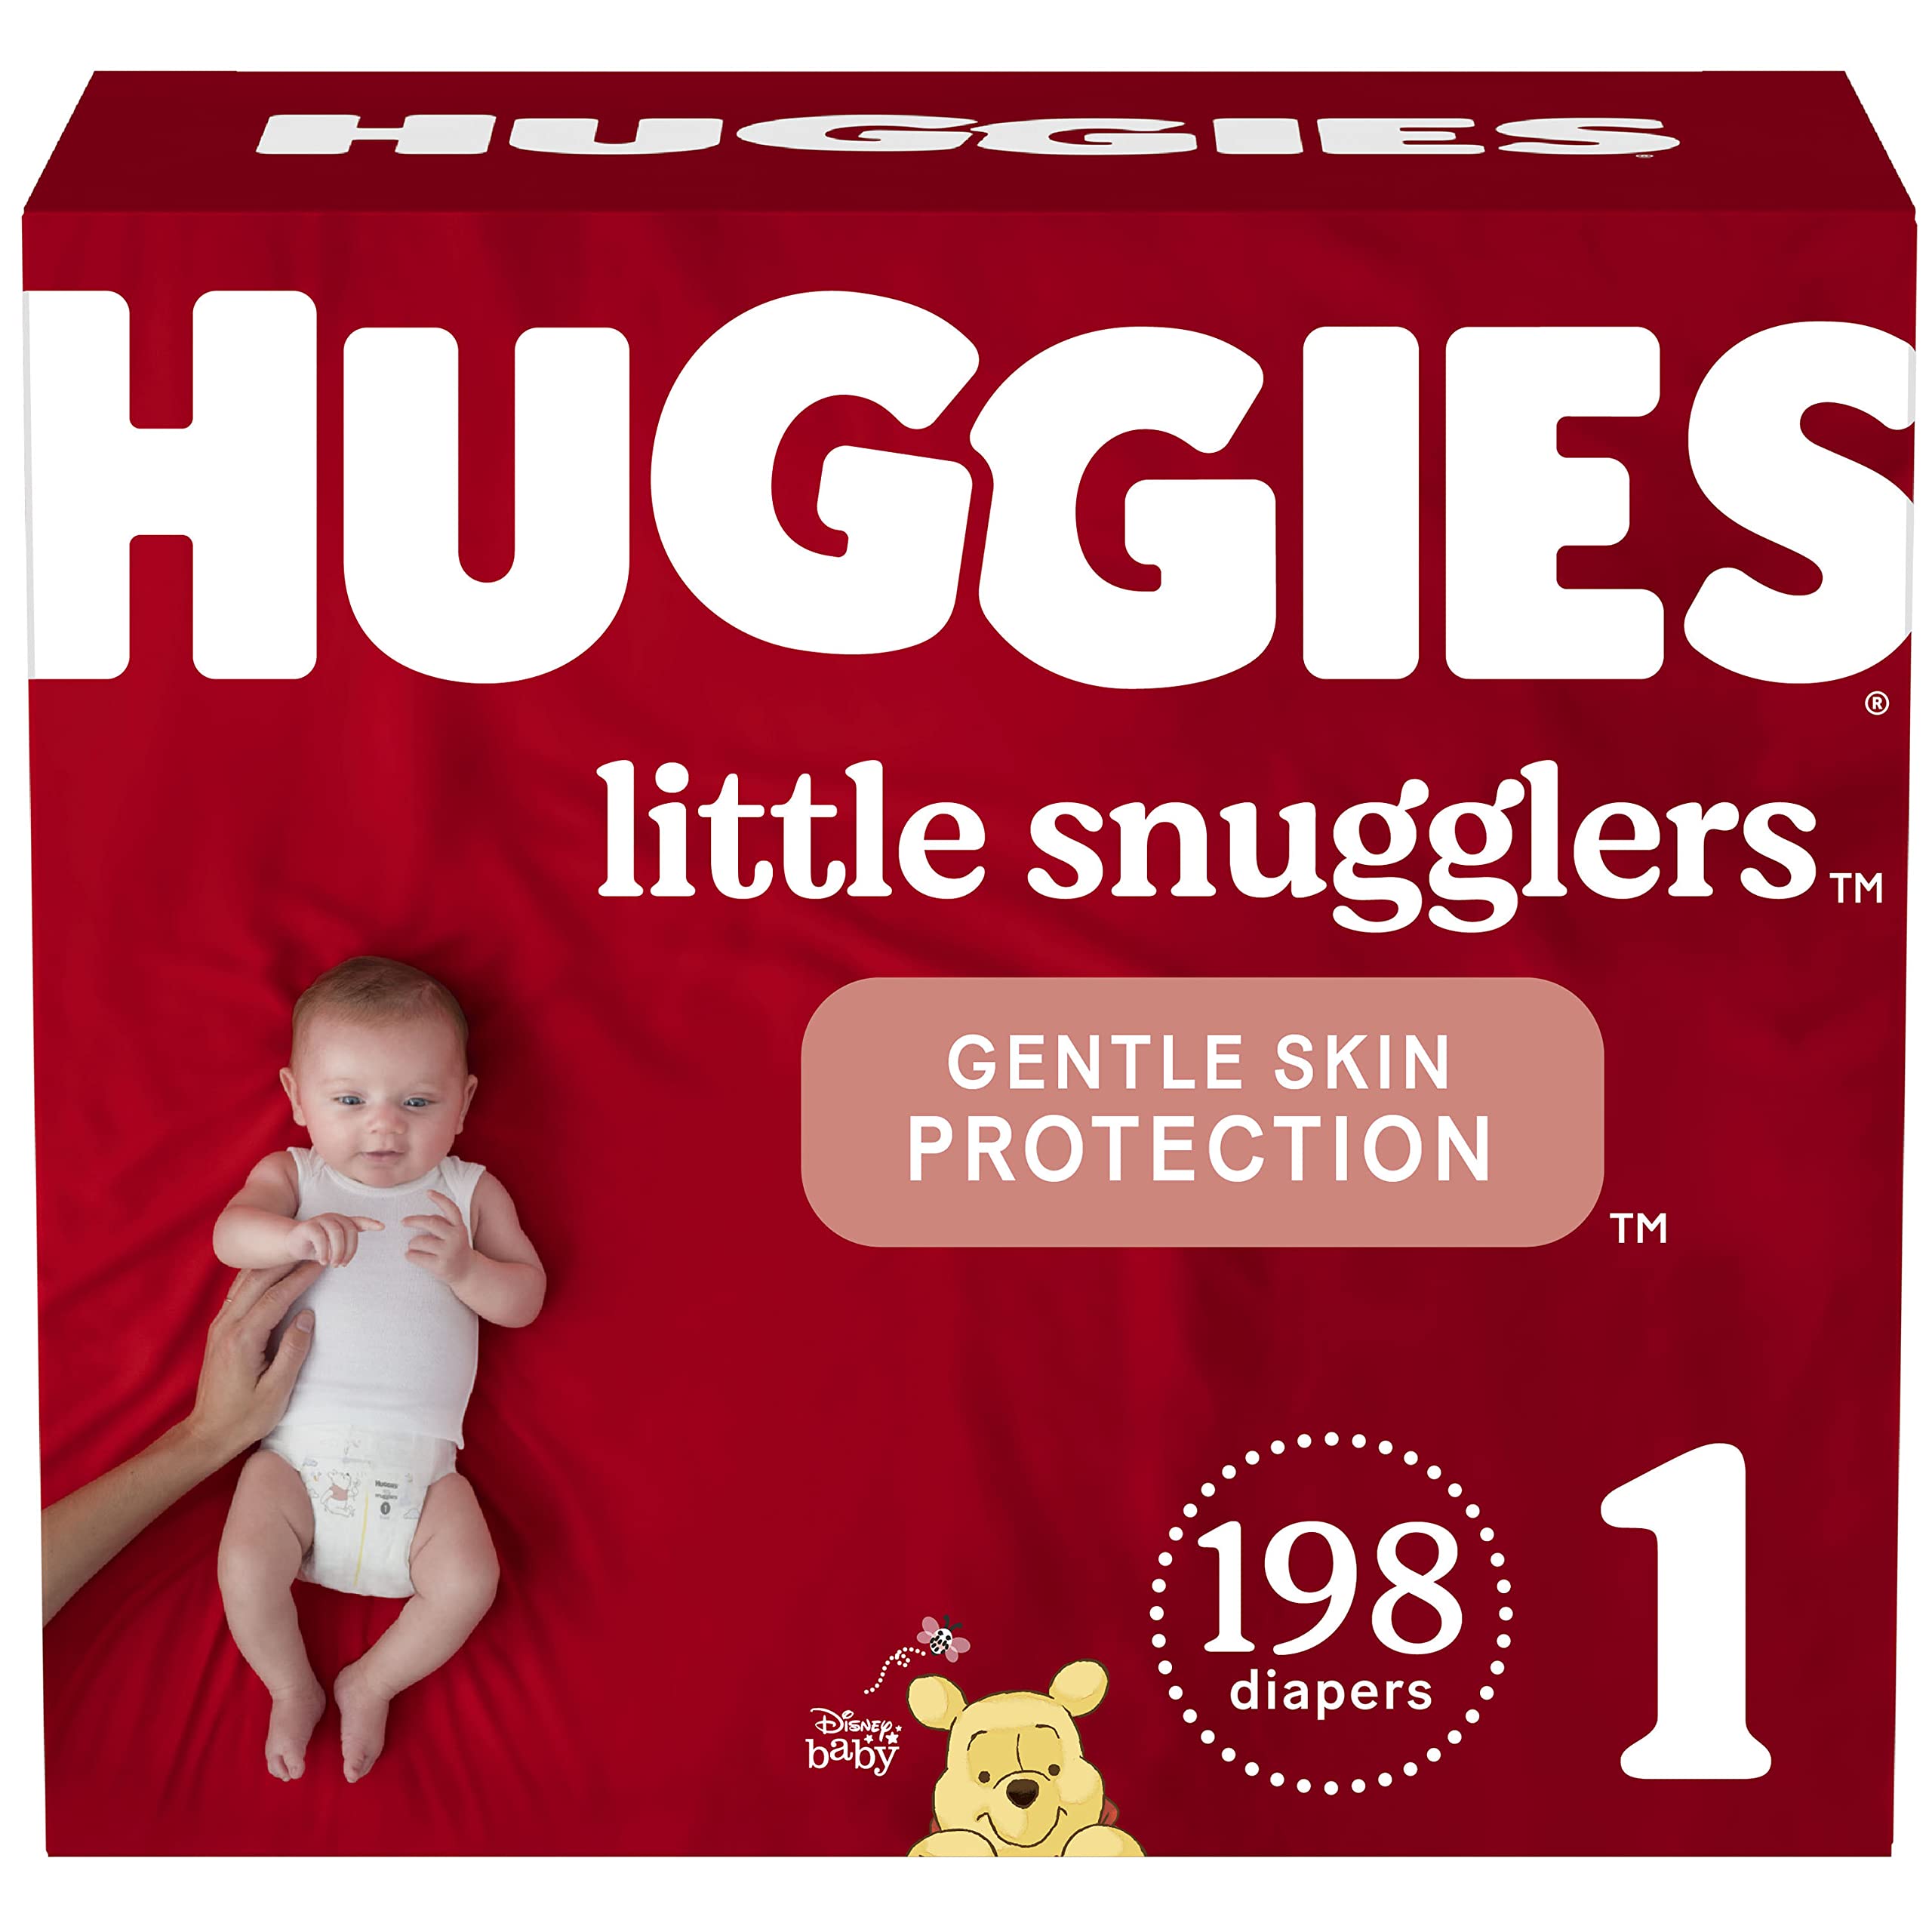 Huggies Bundle - Little Snugglers Baby Diapers, Size 1, 198 Ct, One Month Supply & Natural Care Sensitive Baby Wipes, Unscented, 12 Flip-Top Packs (768 Wipes Total)